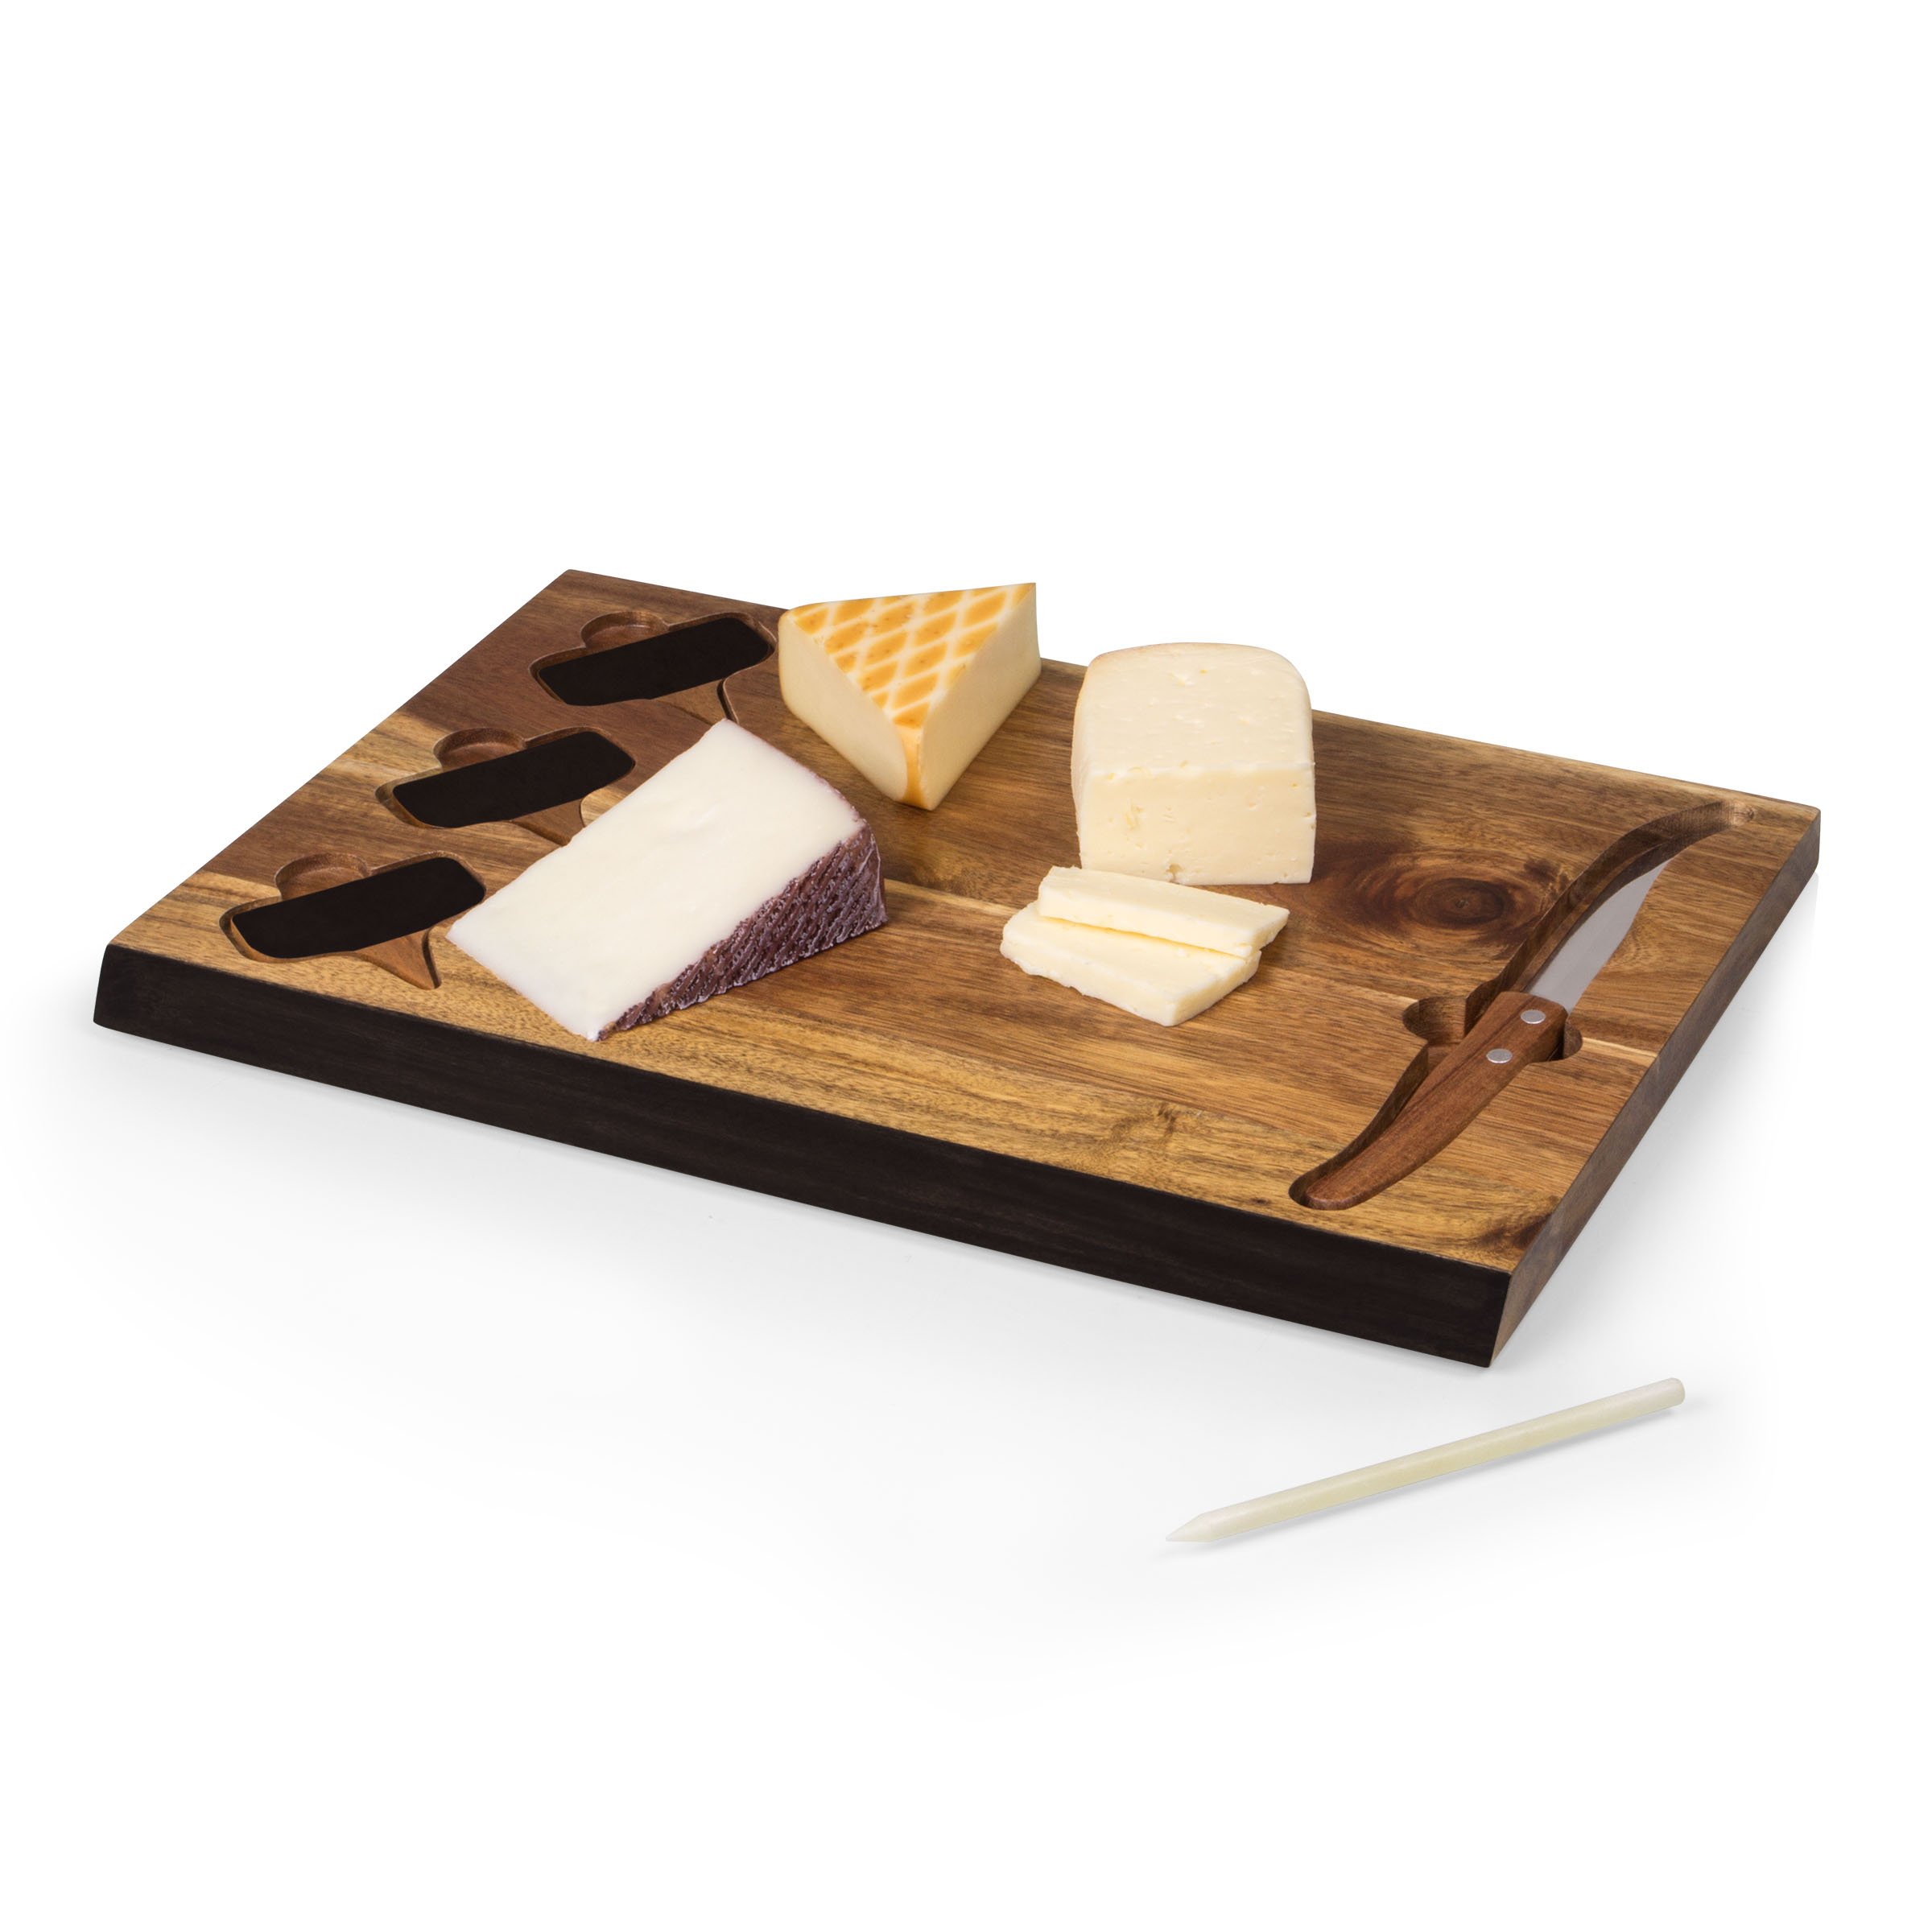 TOSCANA - A Picnic Time brand Delio Cheese Board and Knife Set, Charcuterie Board Set, Acacia Wood Cutting Board with Cheese Knife and Markers, (Acacia Wood)